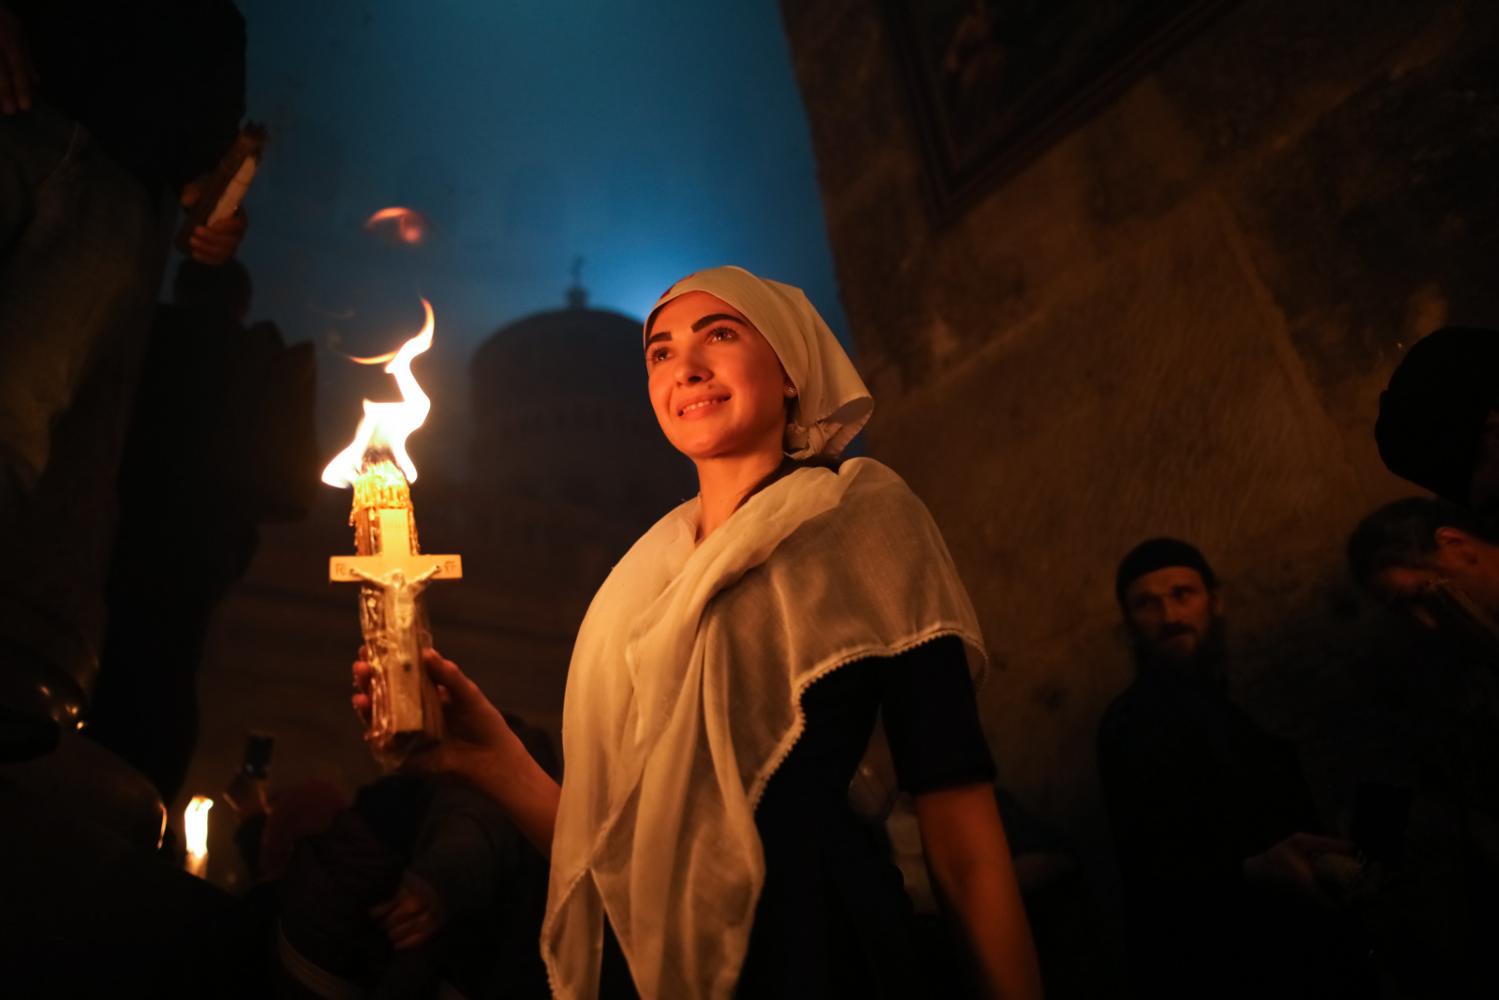 Christian Orthodox worshippers ...her side of the Holy Sepulchre.